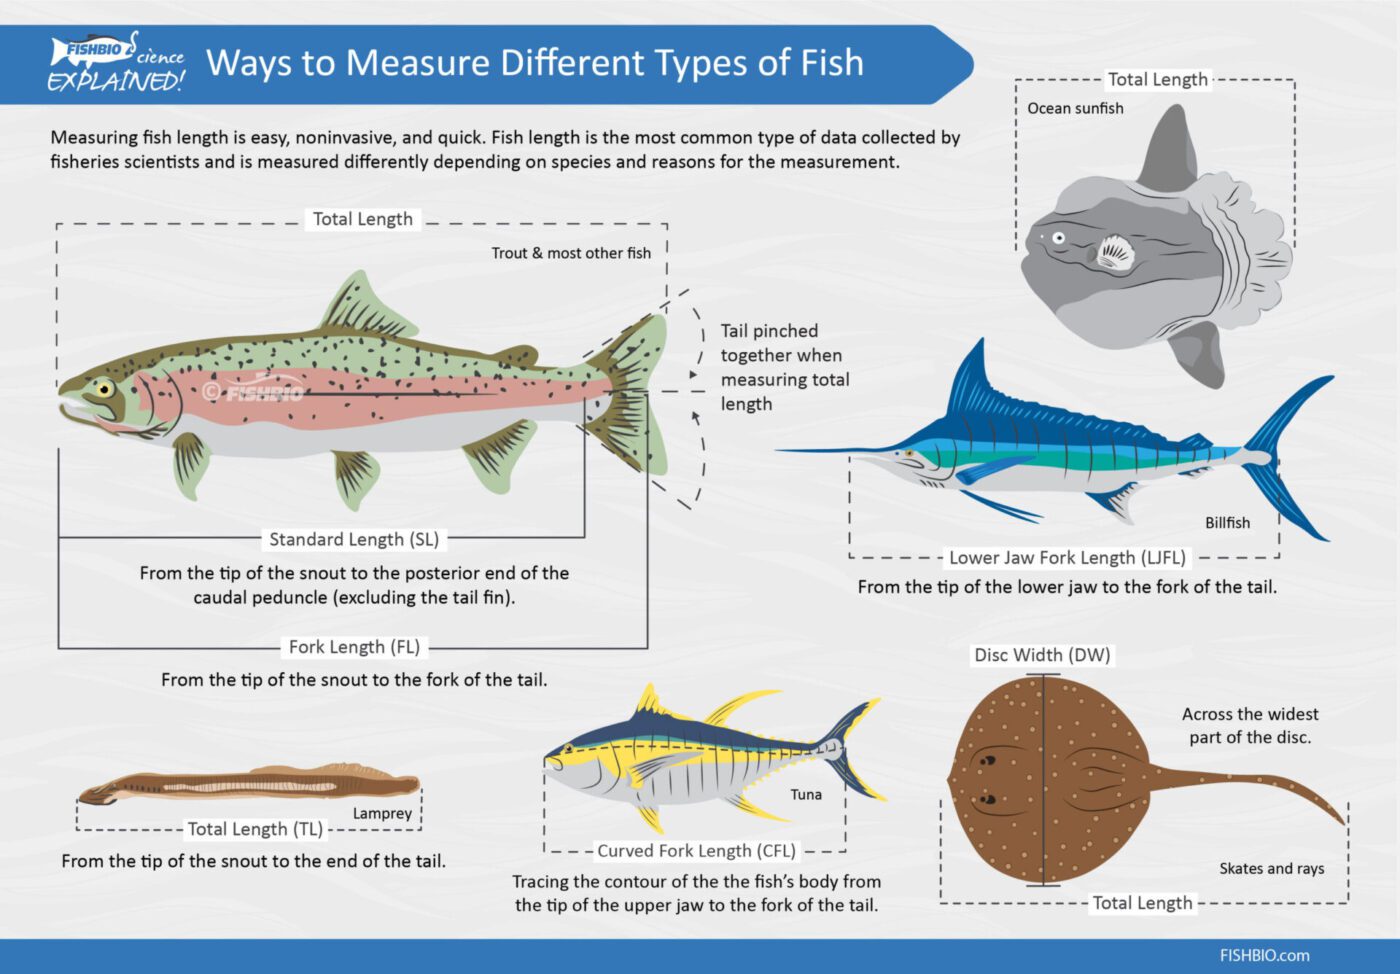 Finding the End of the Rainbow: All the Ways to Measure Fish